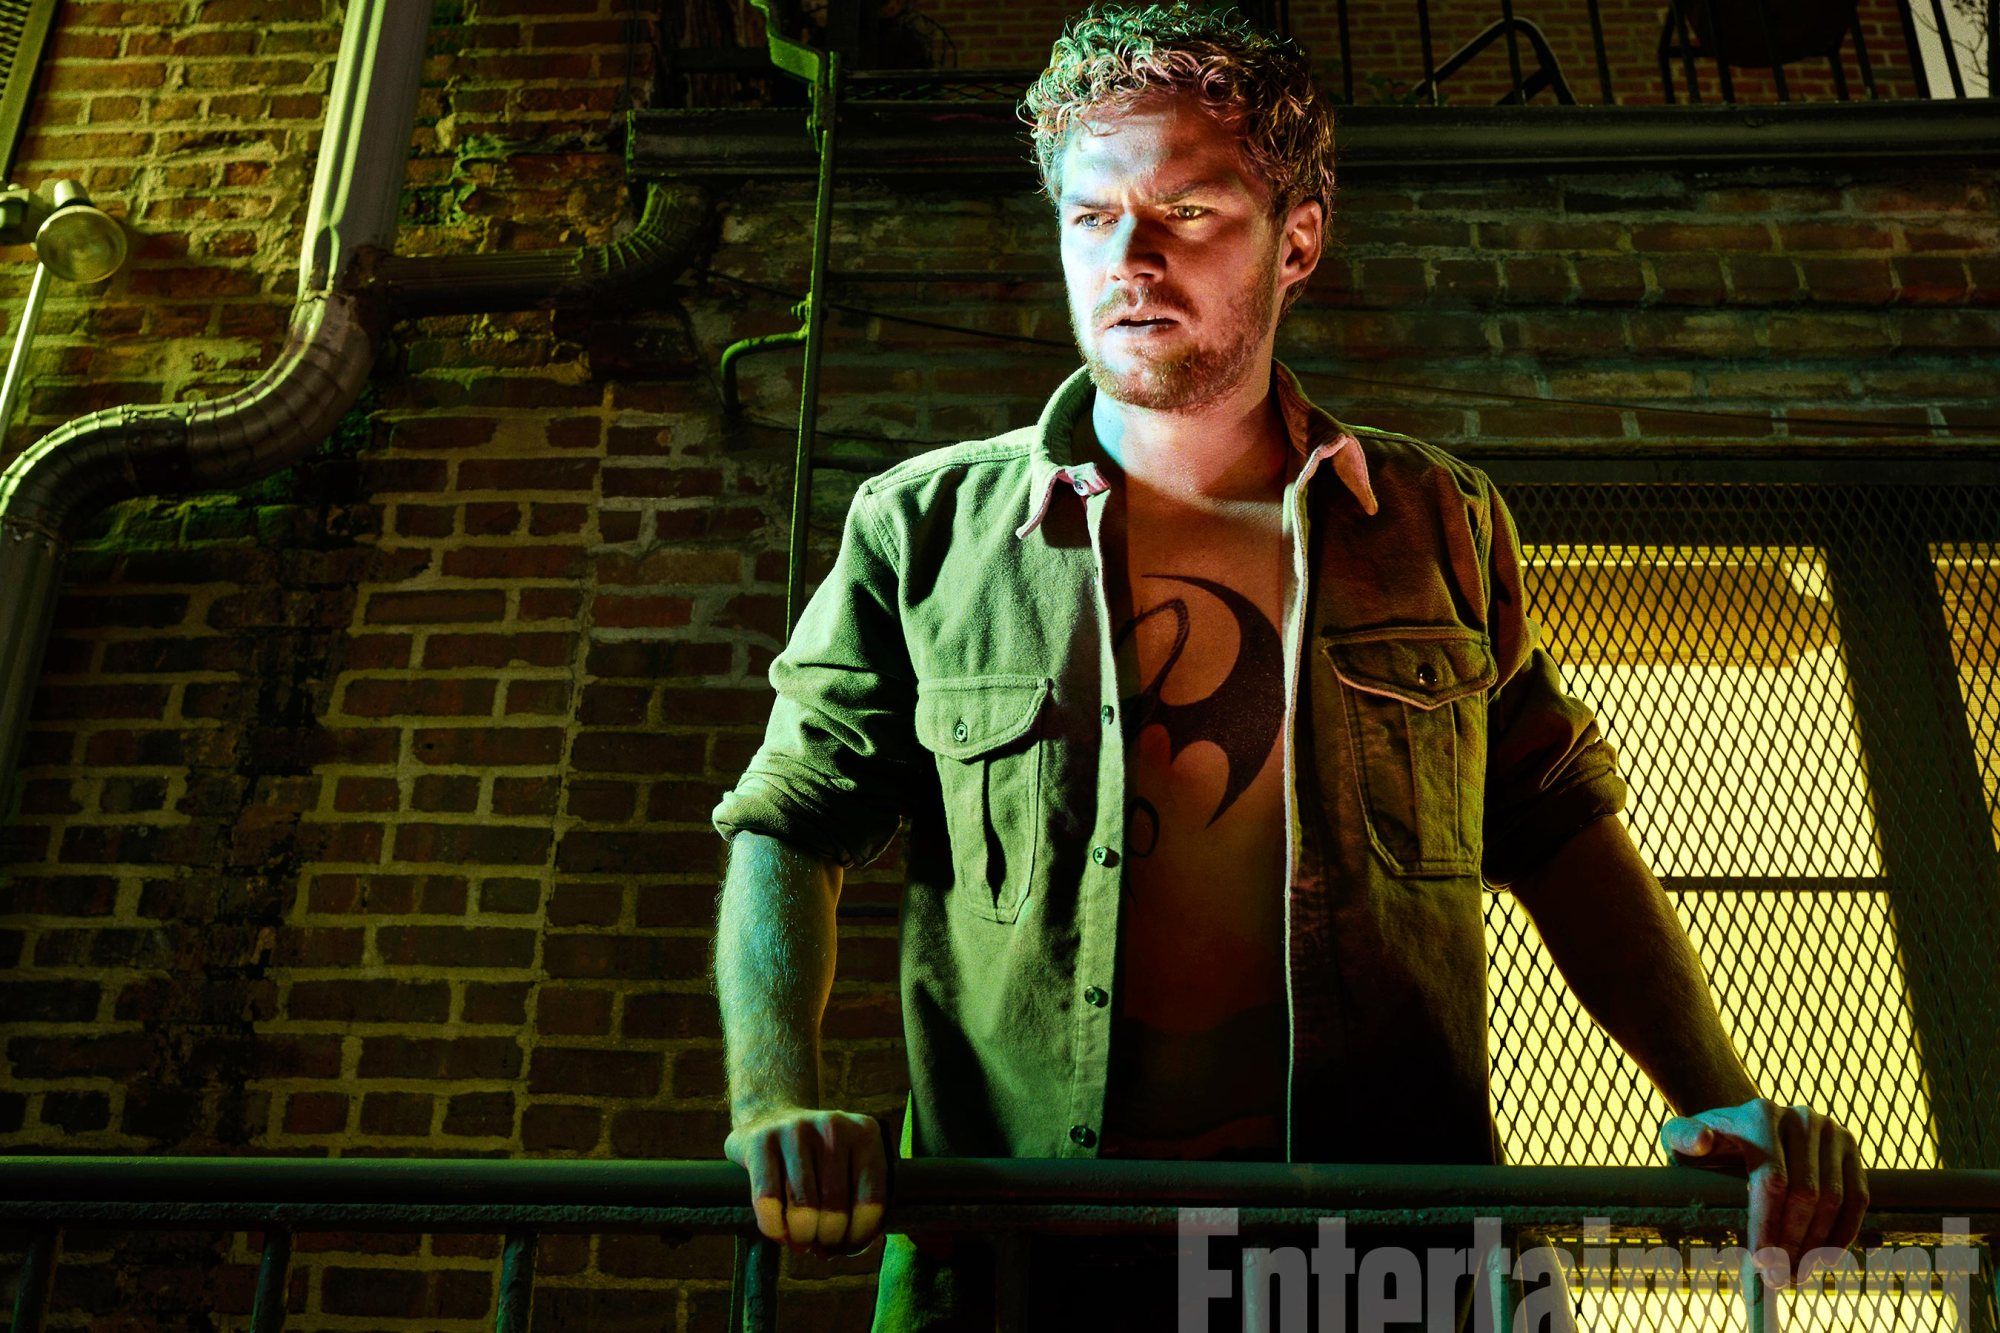 The Defenders, Finn Jones (as Iron Fist), photographed for Entertainment Weekly